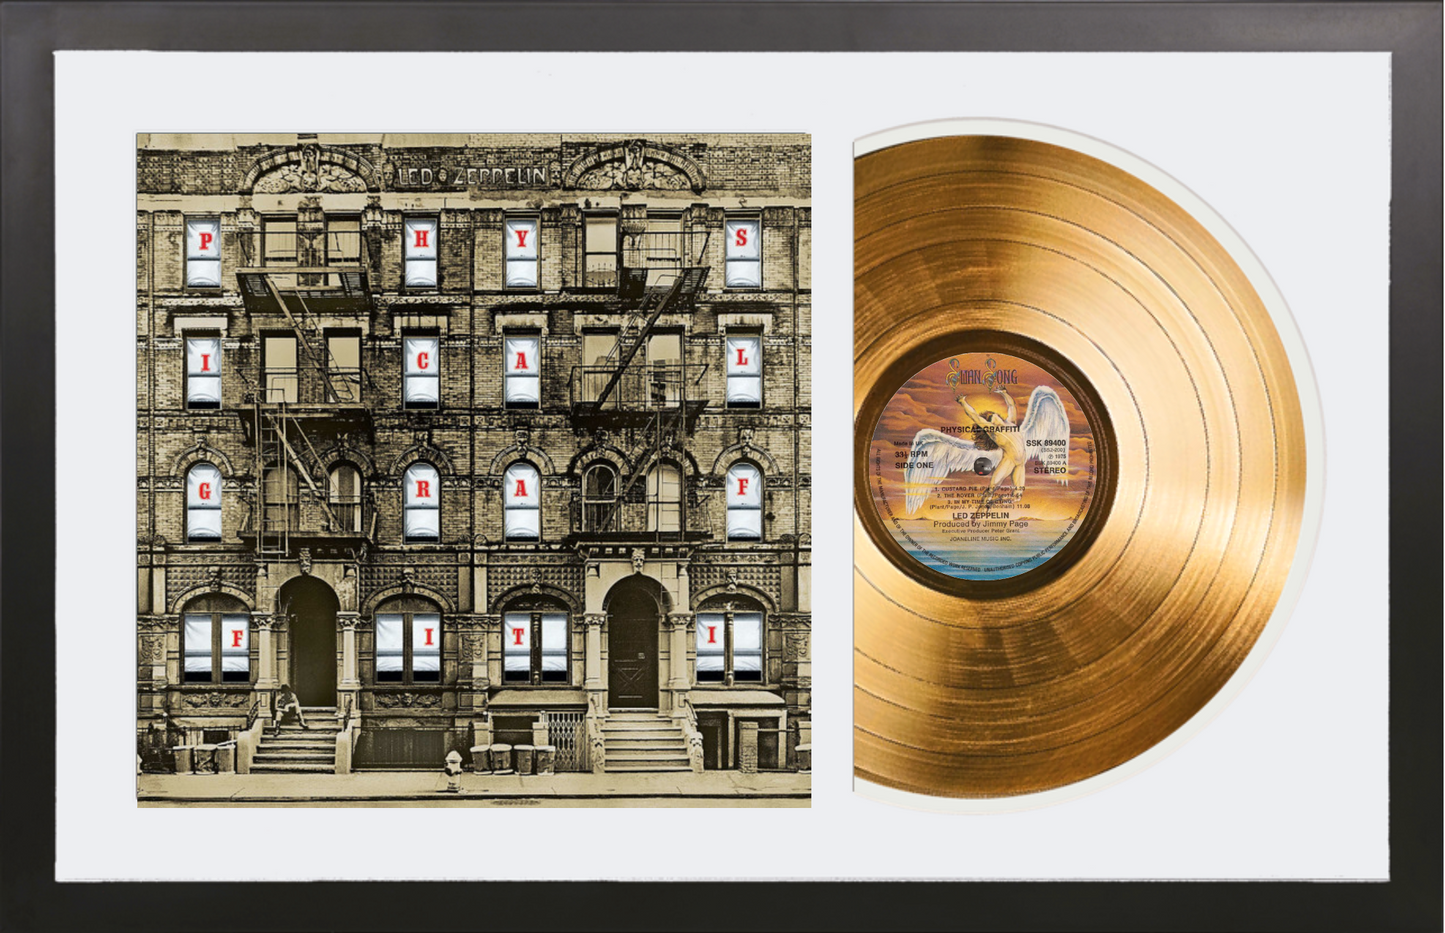 Led Zeppelin - Physical Grafitti - 14K Gold Plated, Limited Edition Album